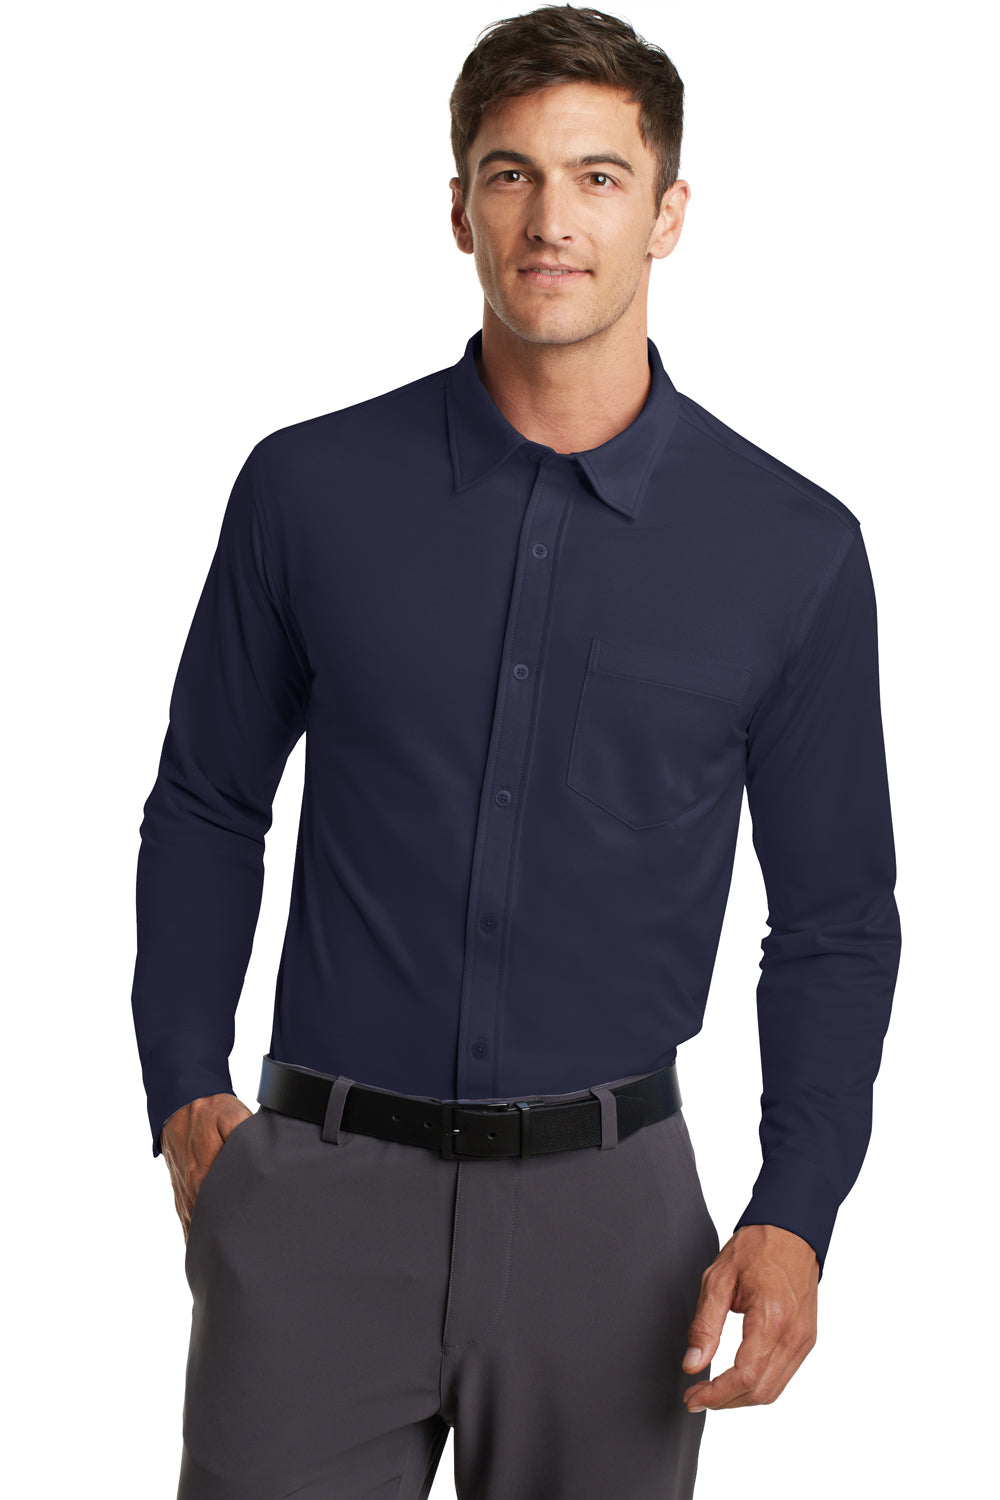 Port Authority K570 Mens Dimension Moisture Wicking Long Sleeve Button Down Shirt w/ Pocket Navy Blue Front